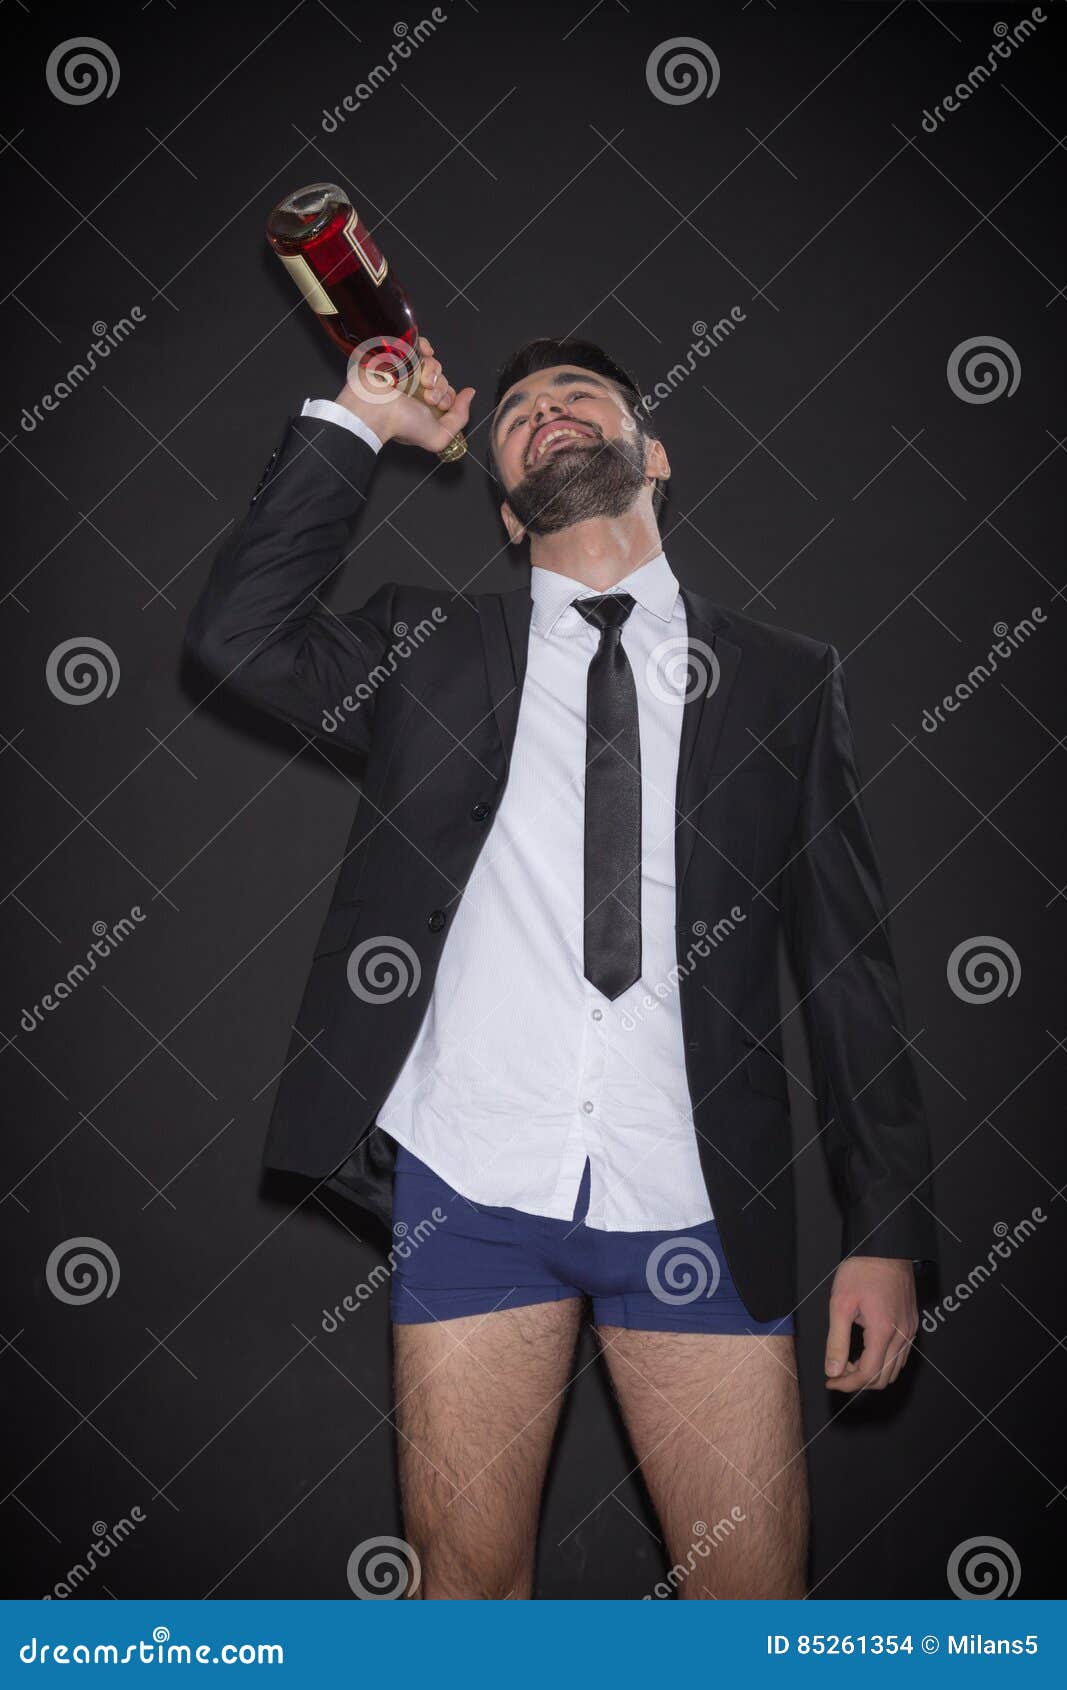 young man bottle alcohol underwear suit legs funny drinking one shirt tie wine black background 85261354